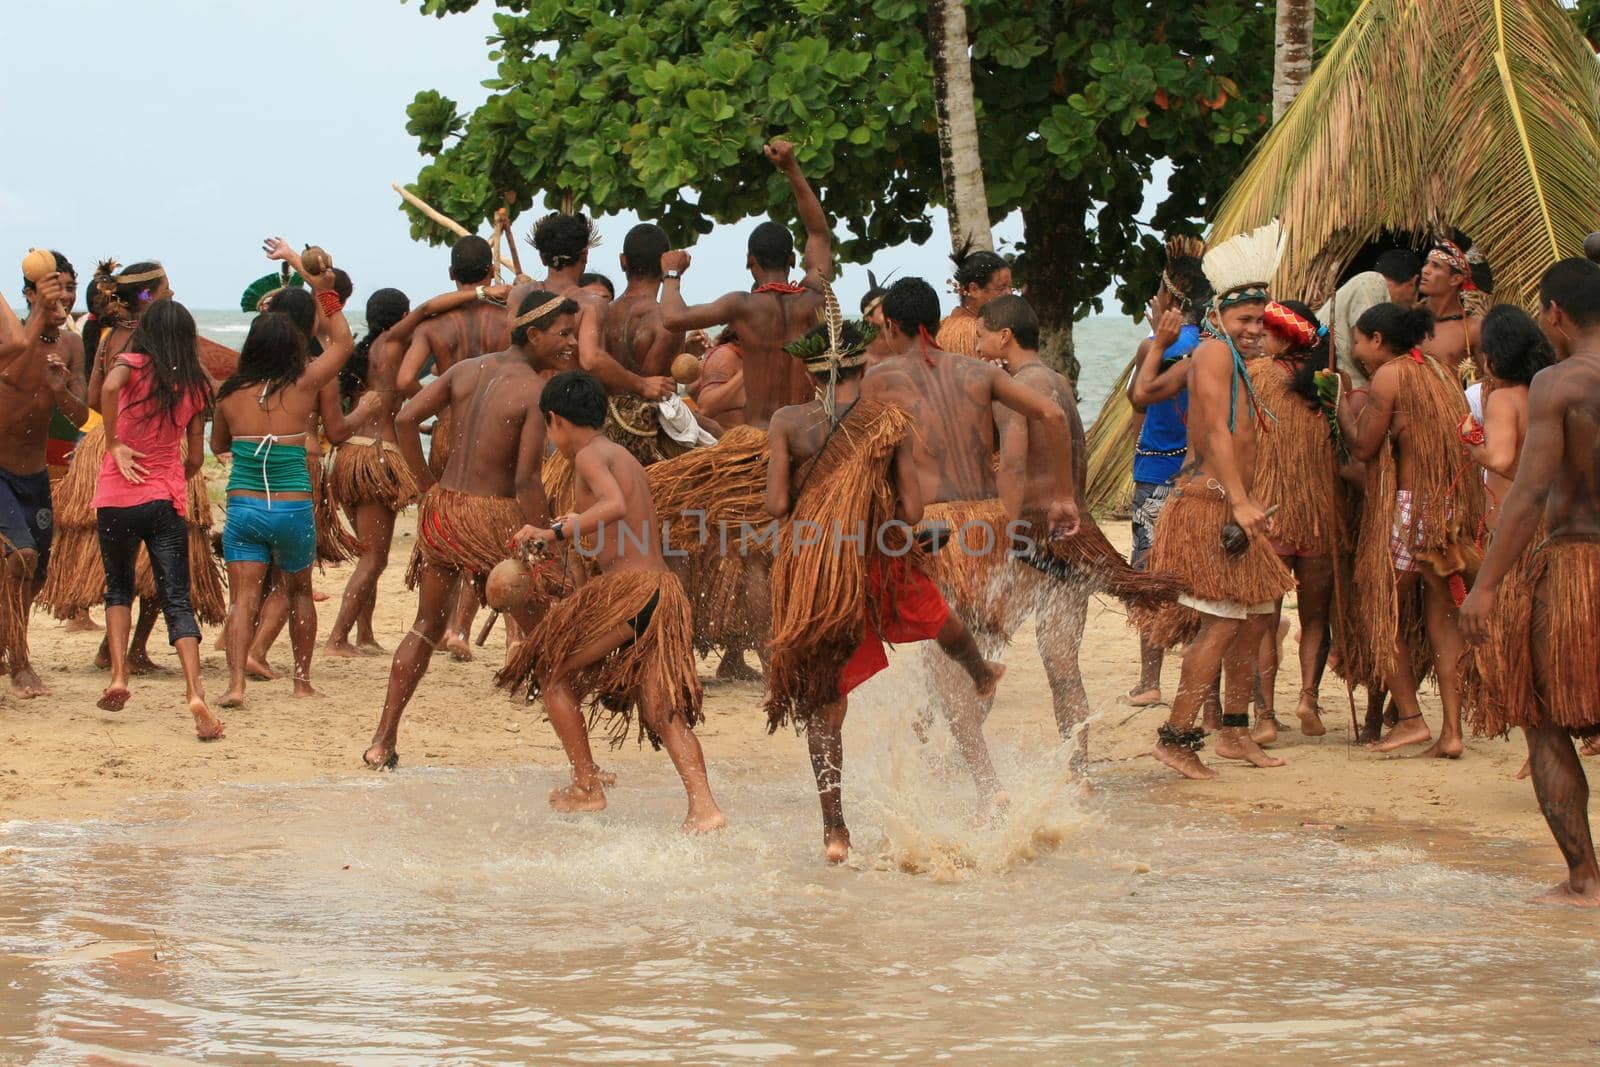 santa cruz cabralia, bahia, brazil - april 20, 2009: Indigenous people of the Pataxo ethnicity playing a football match during the Indigenous Games of the Coroa Vermelha village.